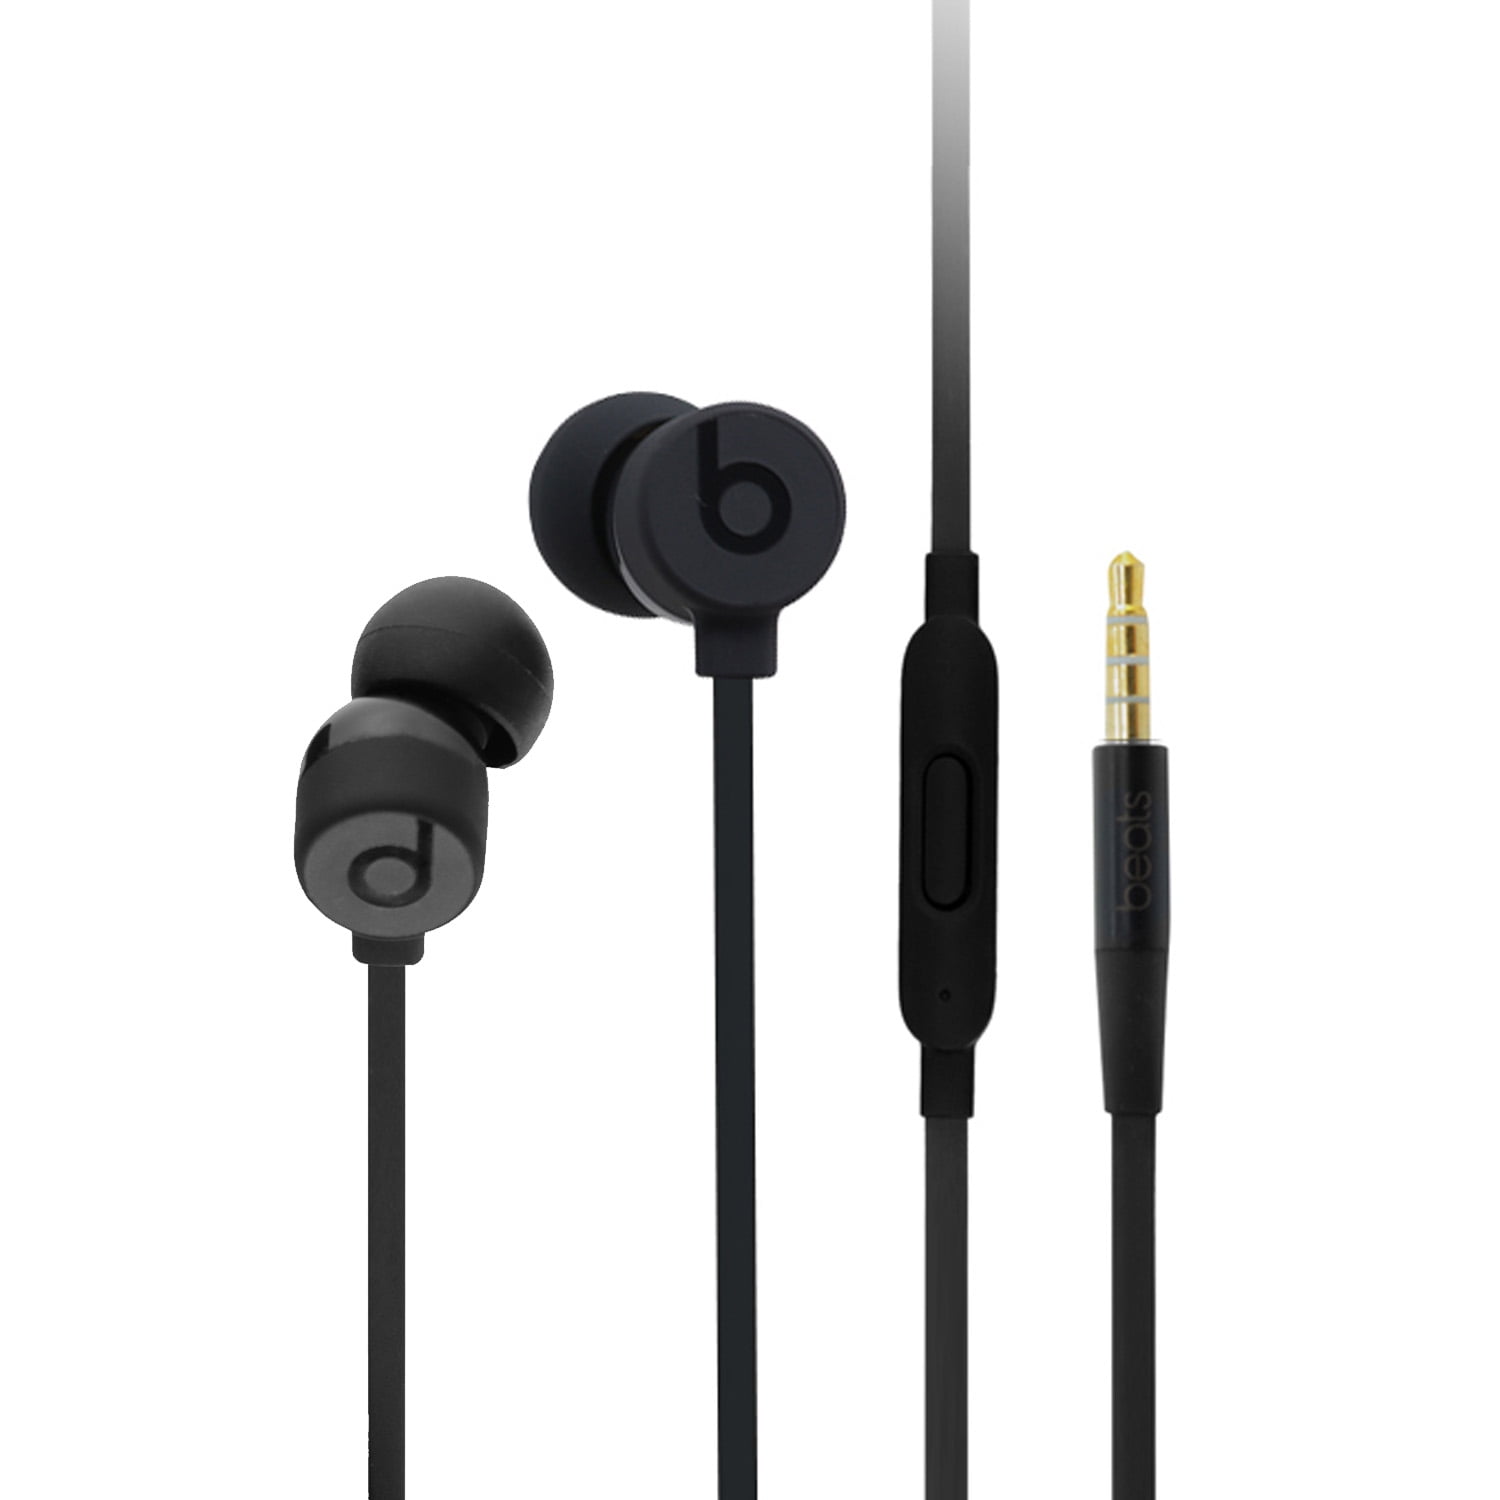 Restored Beats by Dr. Dre Beats 3 Earphones with Linein Mic Wired 3.5mm Jack Isolating, Black (Refurbished) Walmart.com